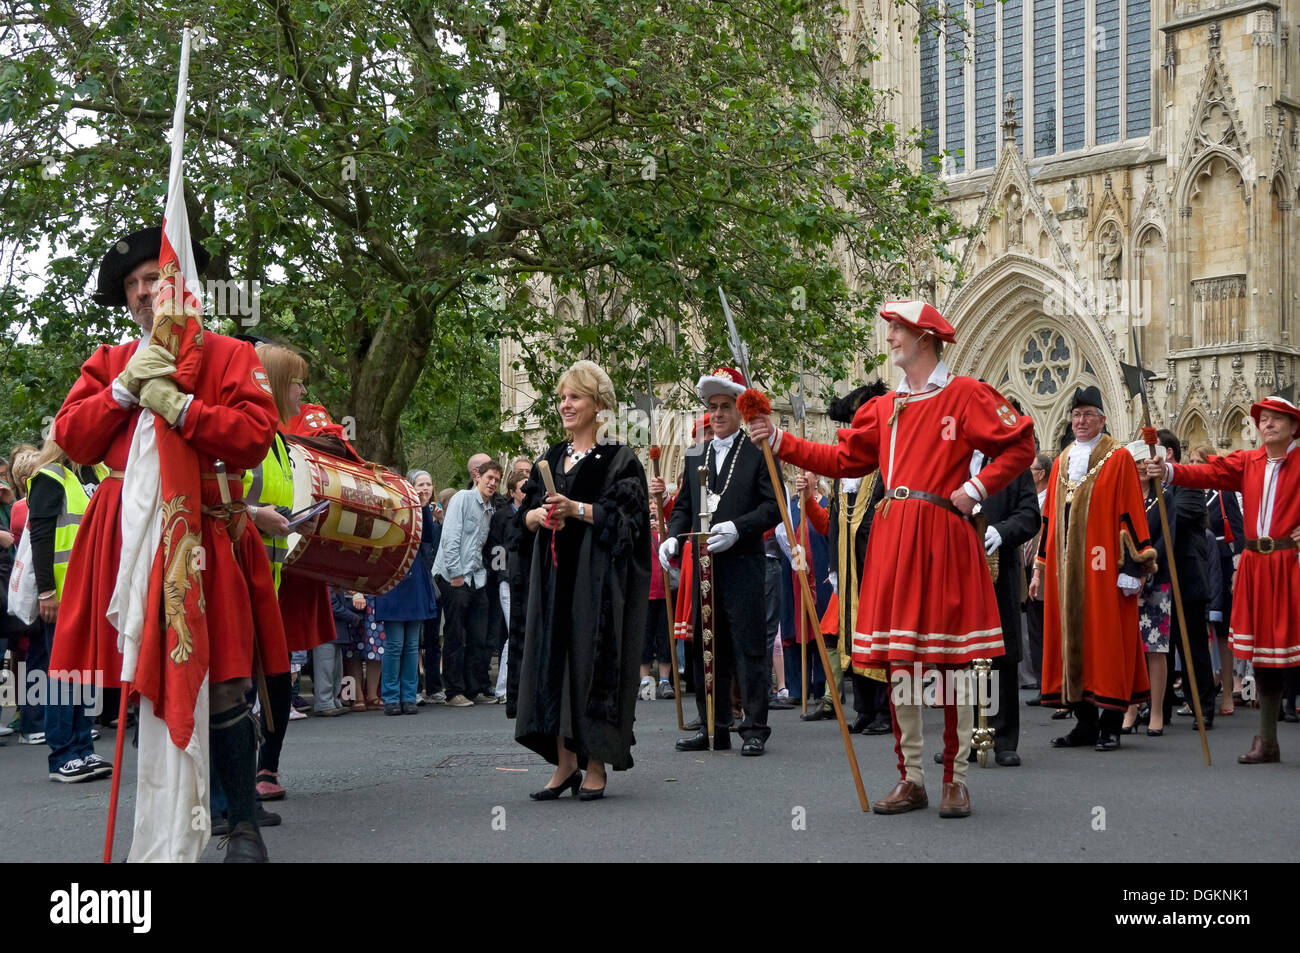 The York Waits outside the Minster to celebrate 800 years since York was granted a Royal Charter by King John in 1212. Stock Photo